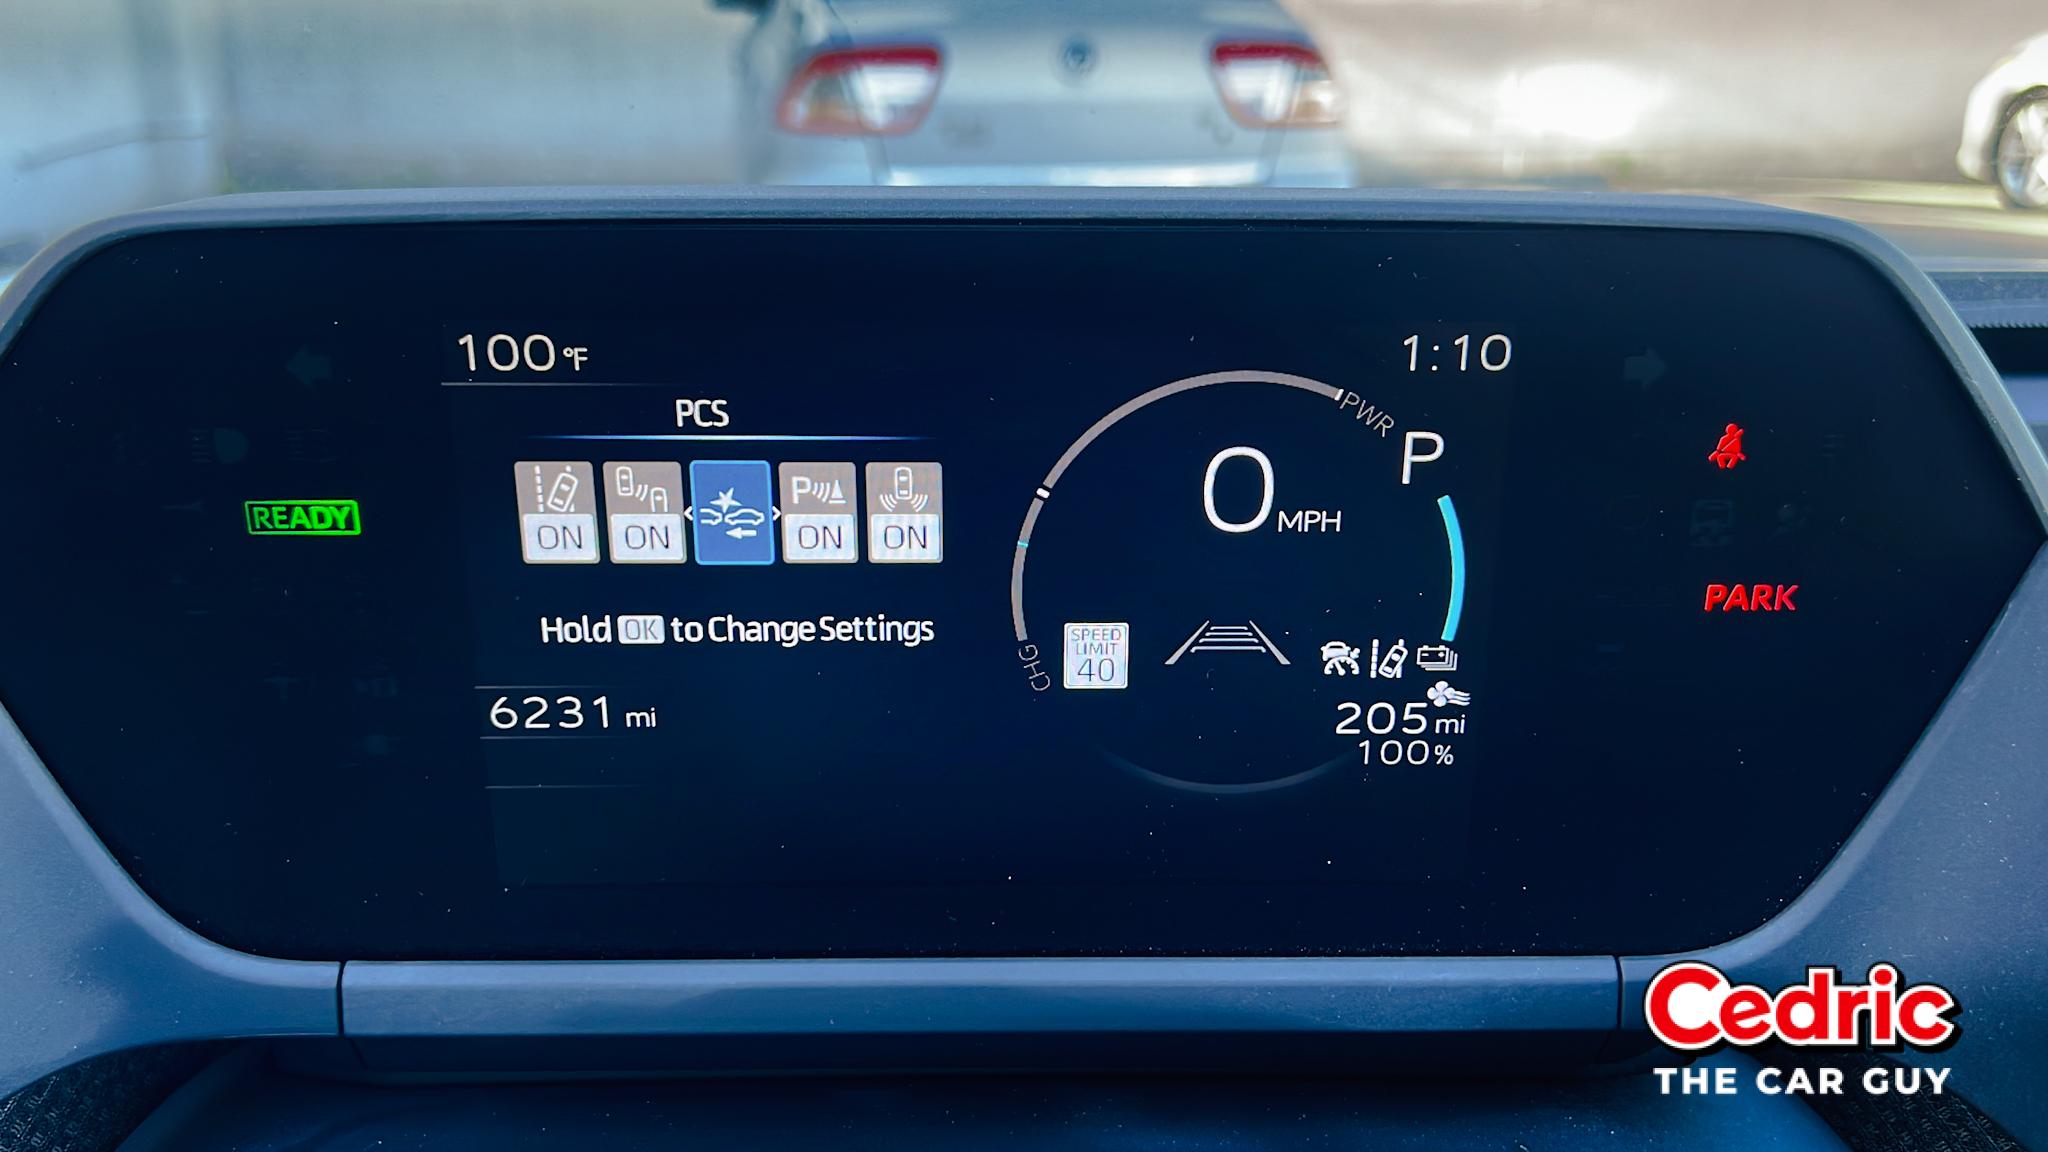 Pre-Collision System Menu within the Toyota Prius' Multi-Information Display (MID)